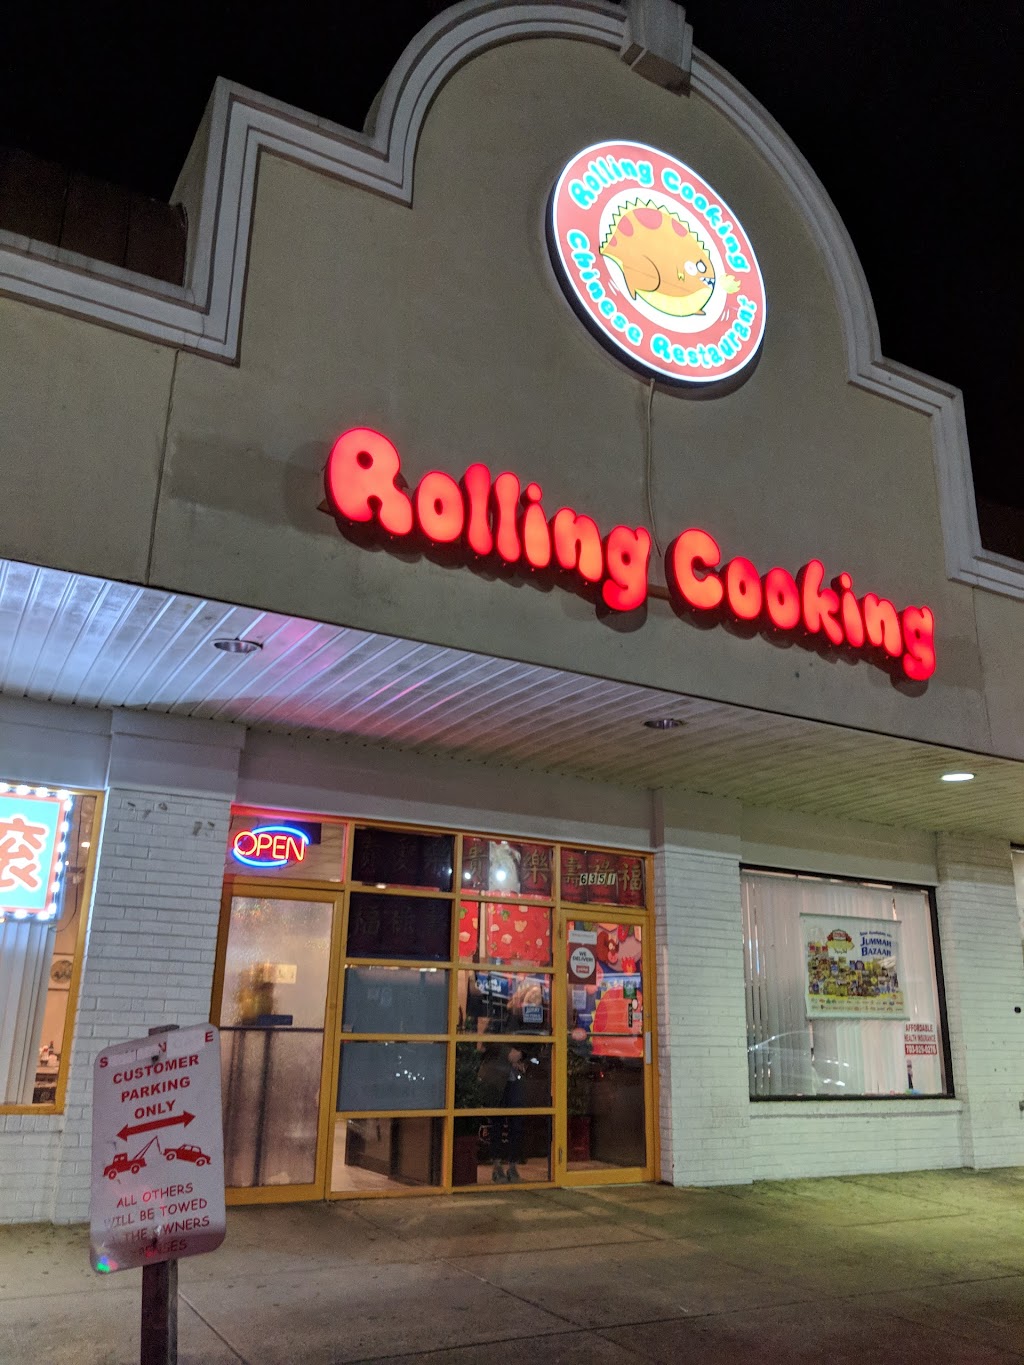 Rolling Cooking | 6351 Rolling Rd, Springfield, VA 22152, USA | Phone: (703) 451-0553